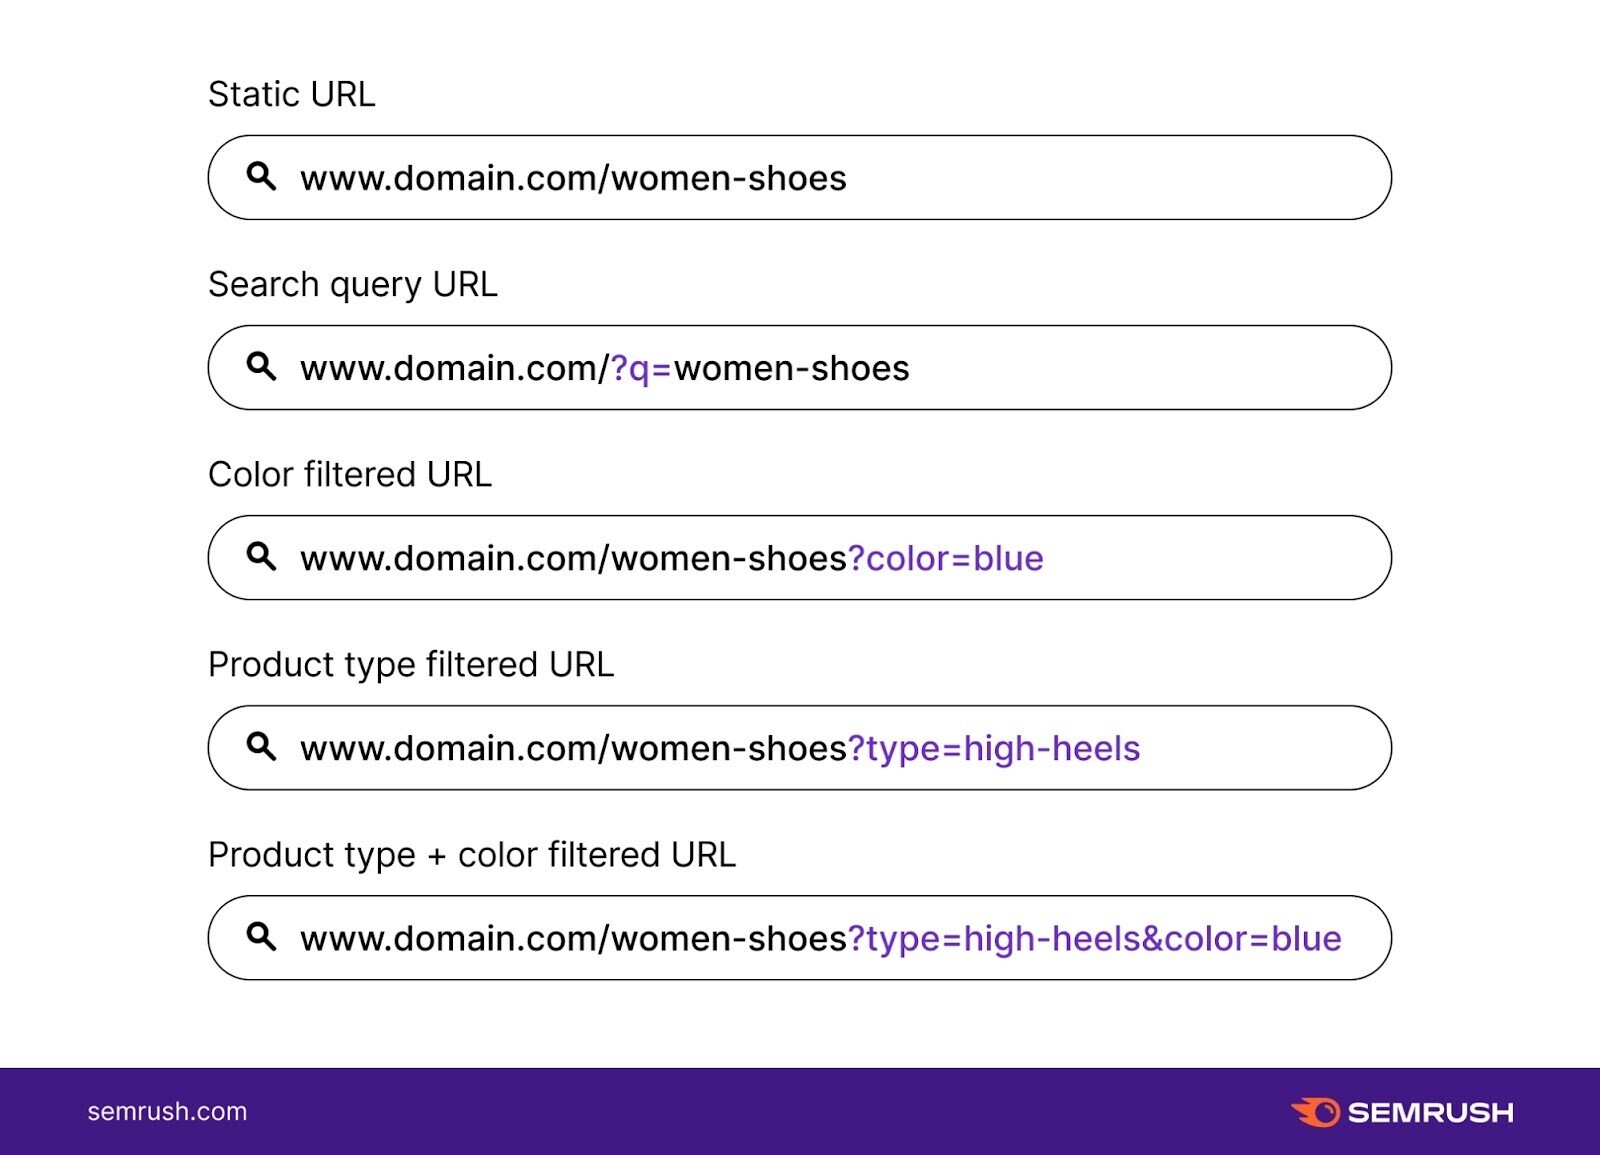 example of a few parameterized URLs from an online shoe store